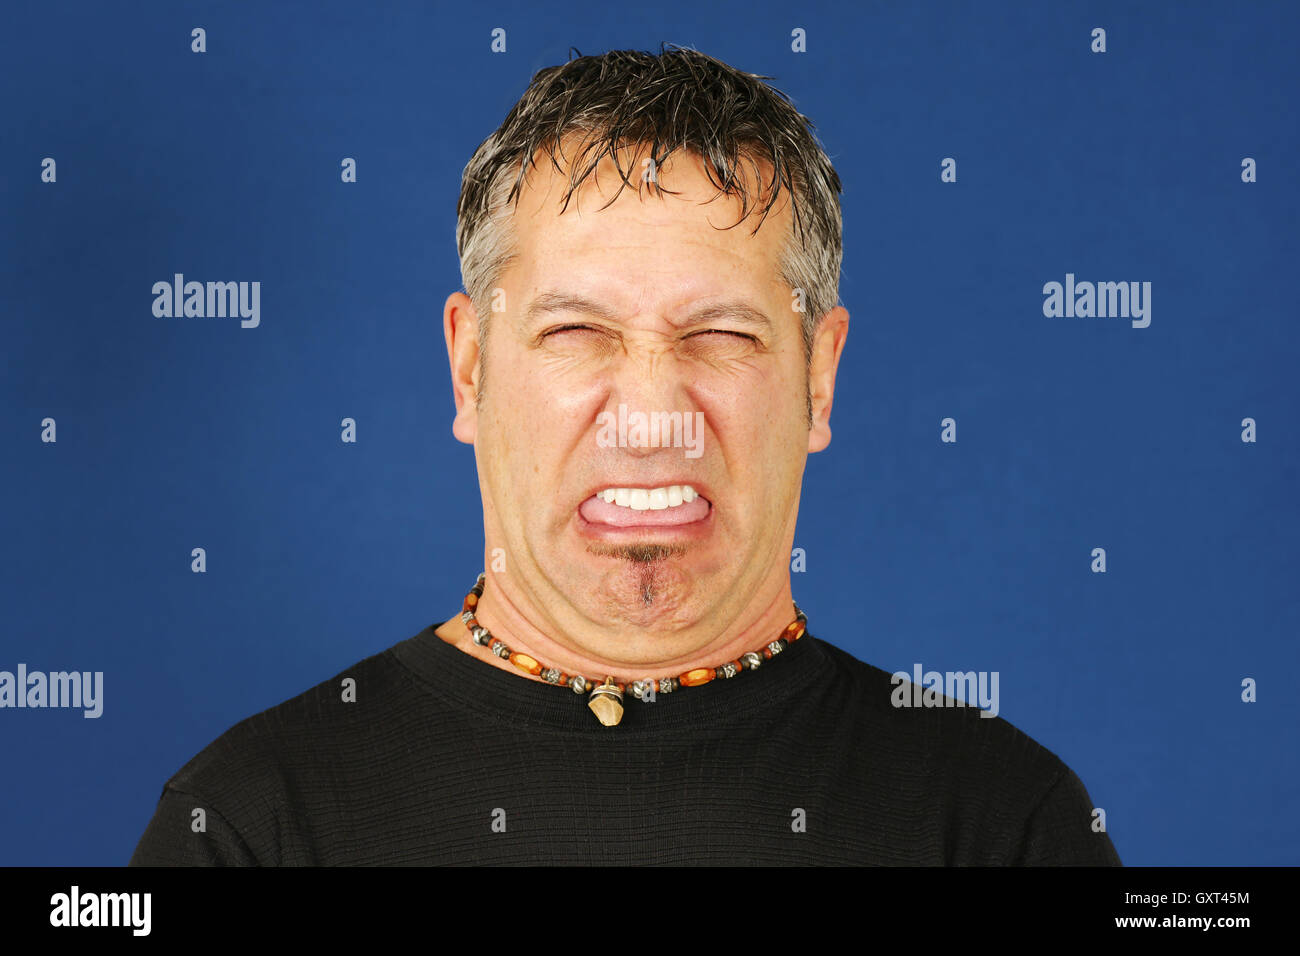 Disgusted man Stock Photo